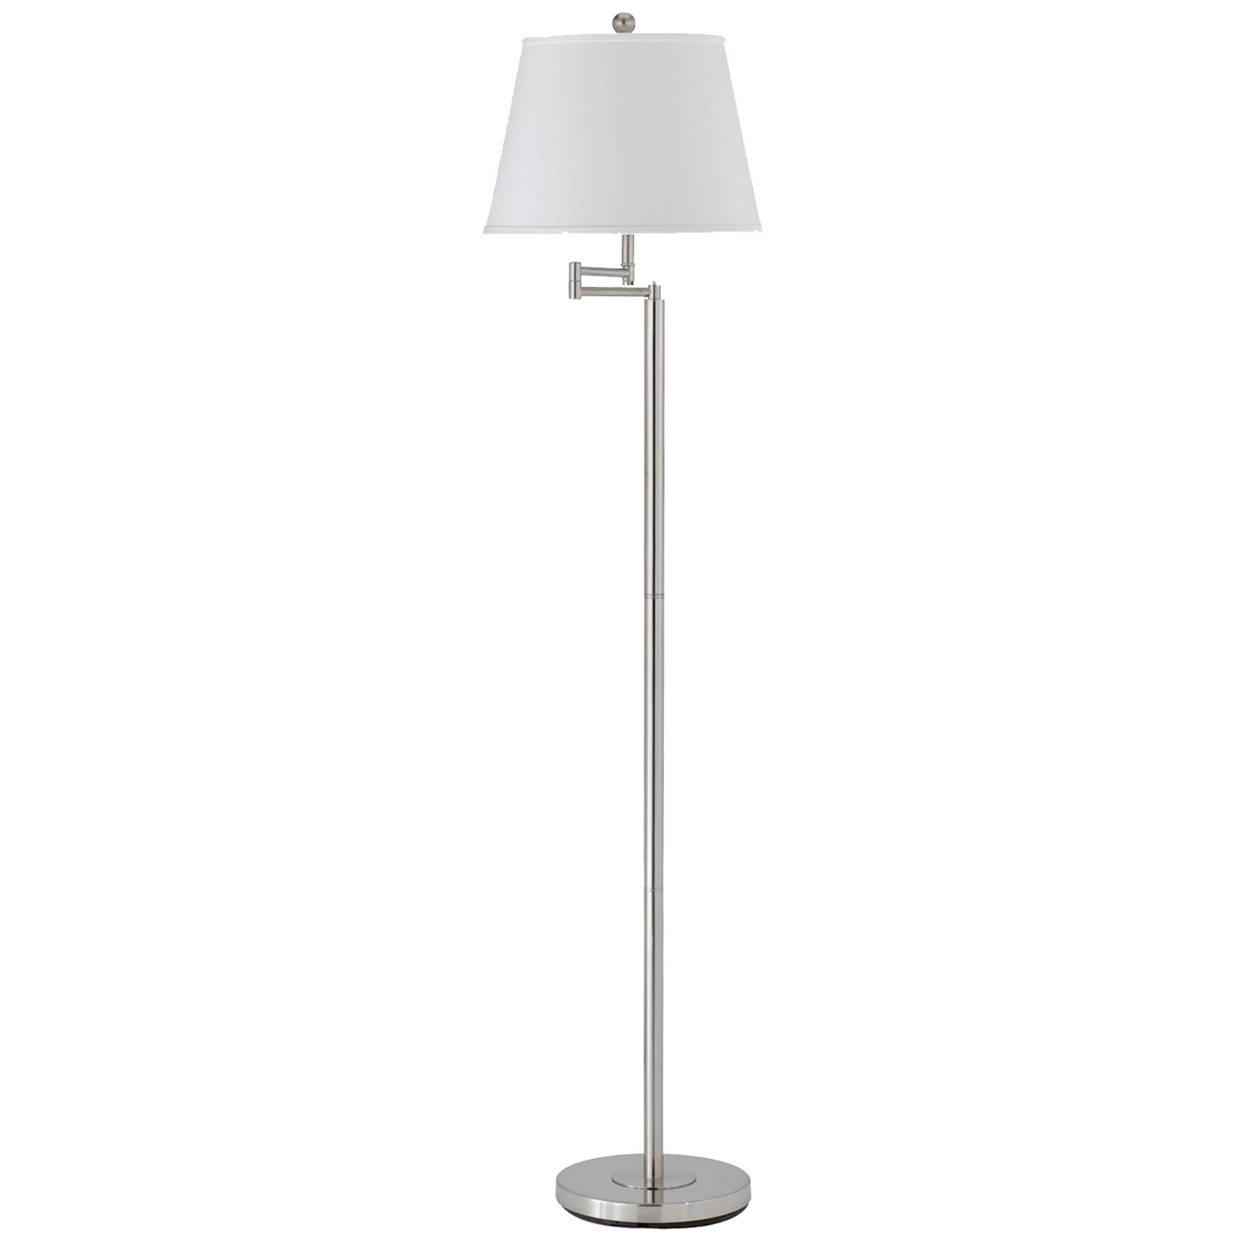 Metal Round 3 Way Floor Lamp With Spider Type Shade, Silver And White- Saltoro Sherpi